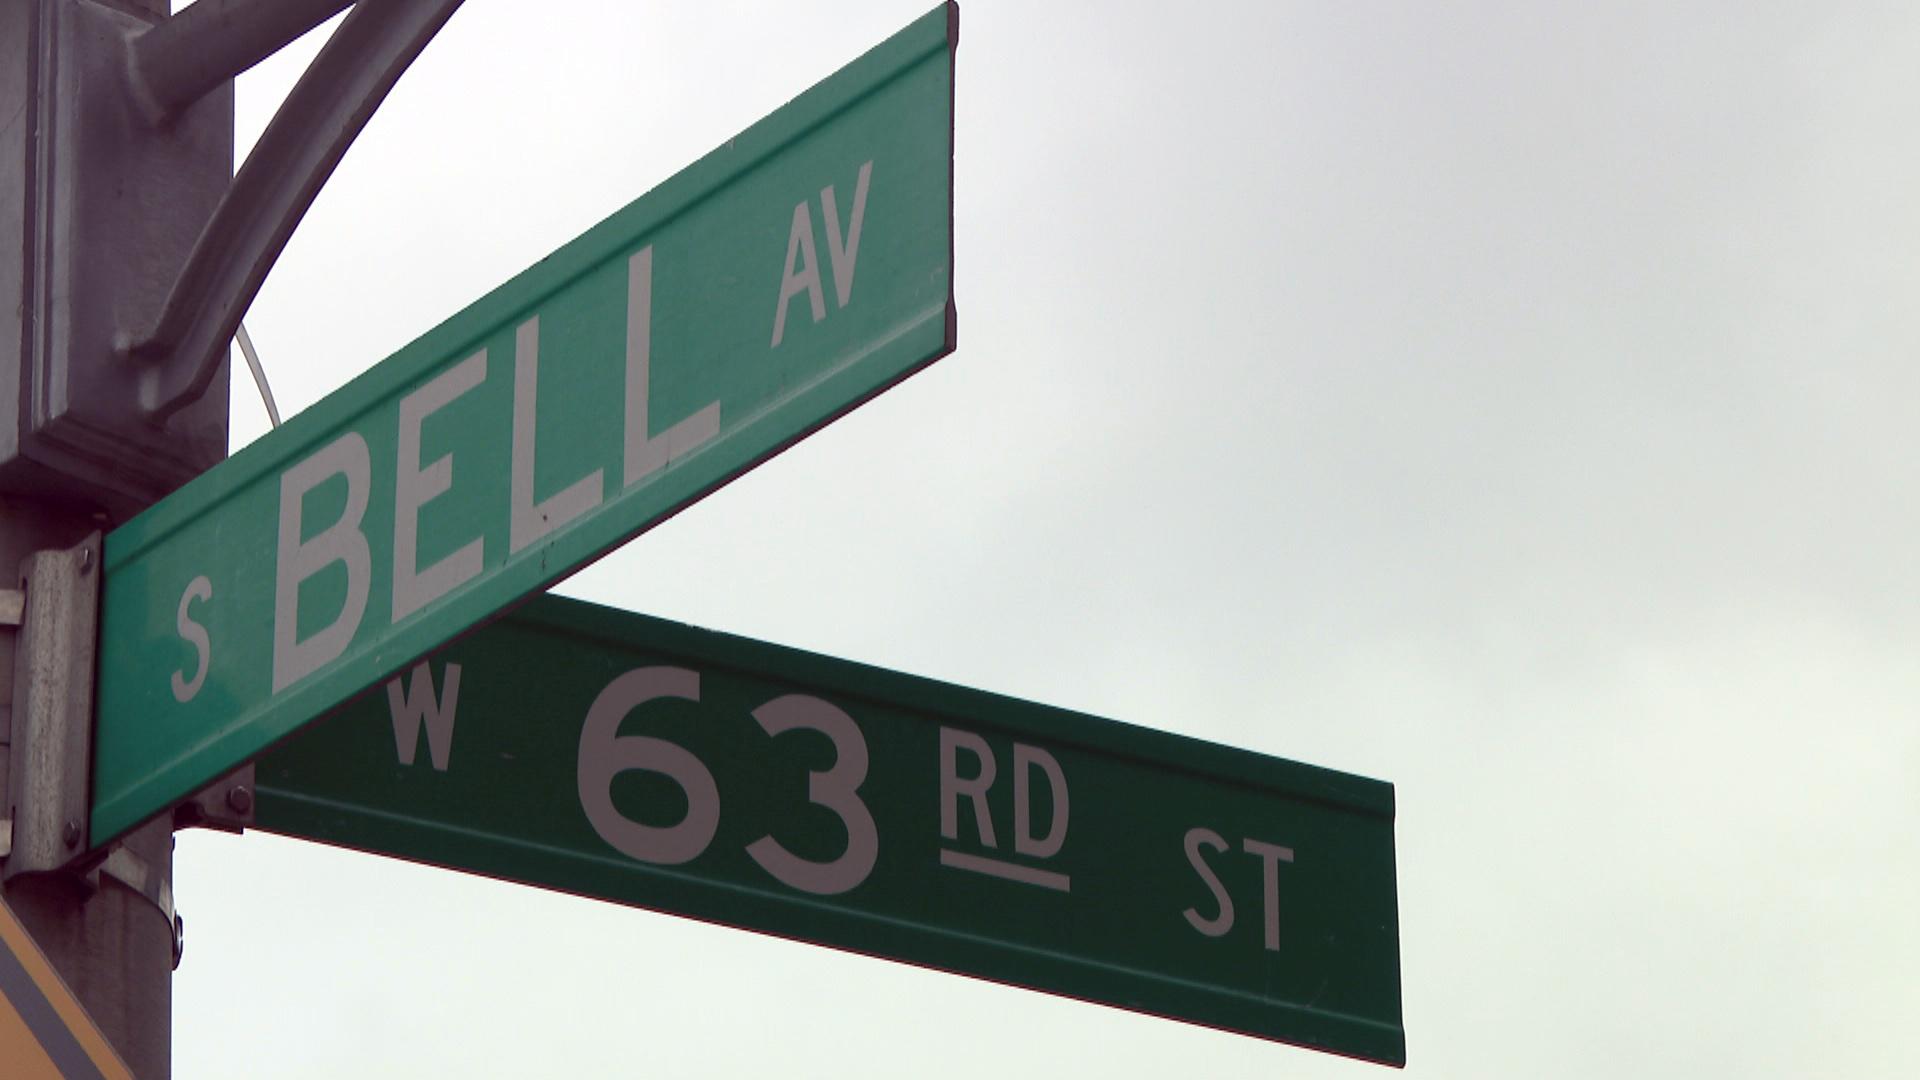 The intersection of 63rd Street and Bell Avenue in Chicago. (WTTW News)